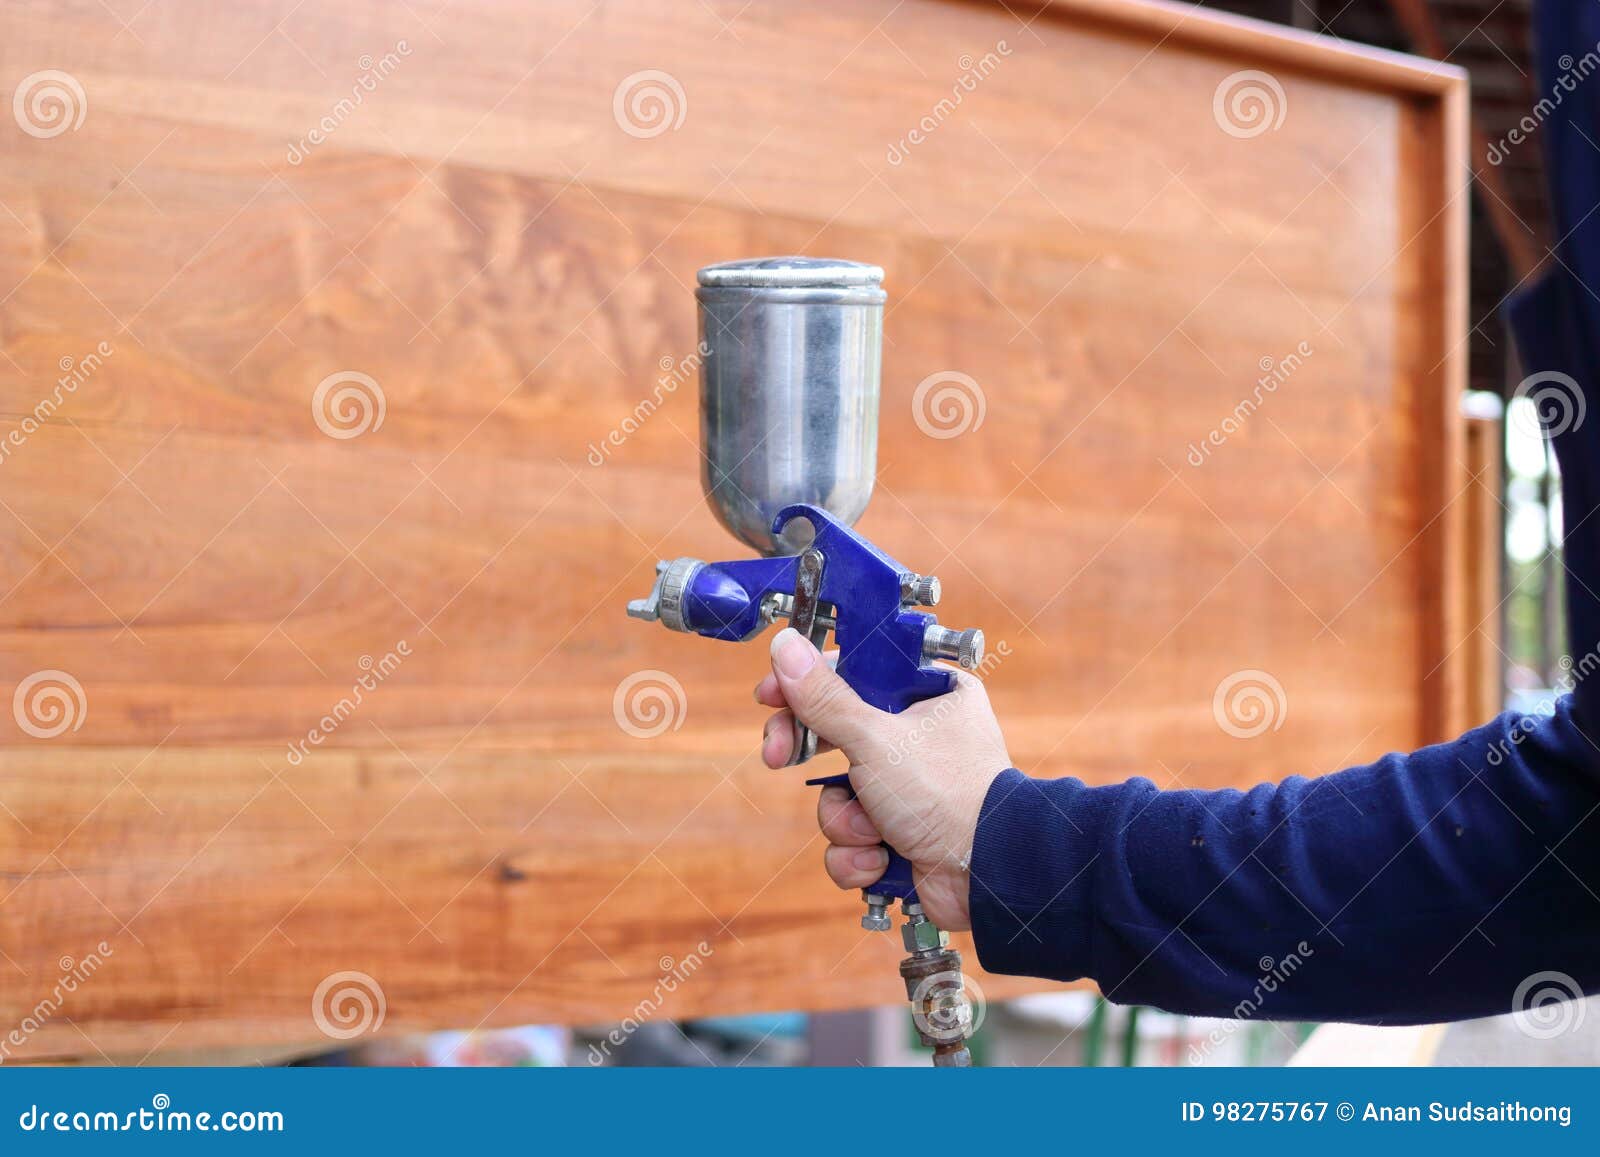 Hands Of Industrial Worker Applying Spray Paint Gun With A Wooden